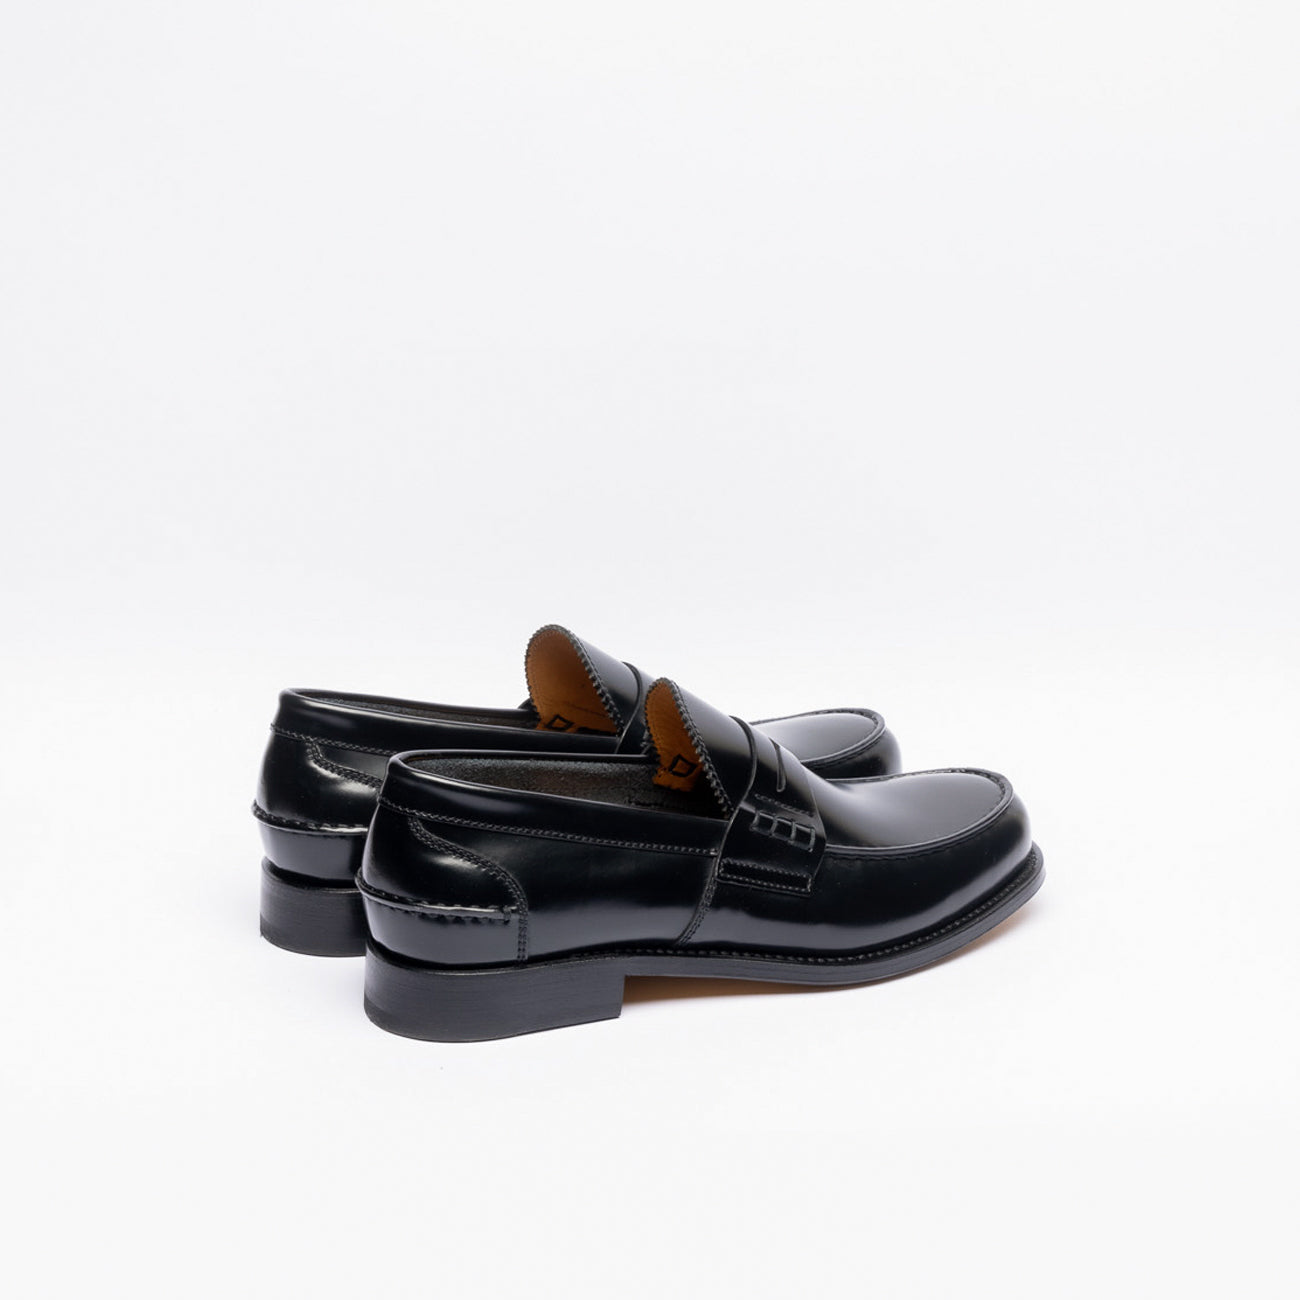 Penny loafer Borghini 750 moccasin in black brushed leather